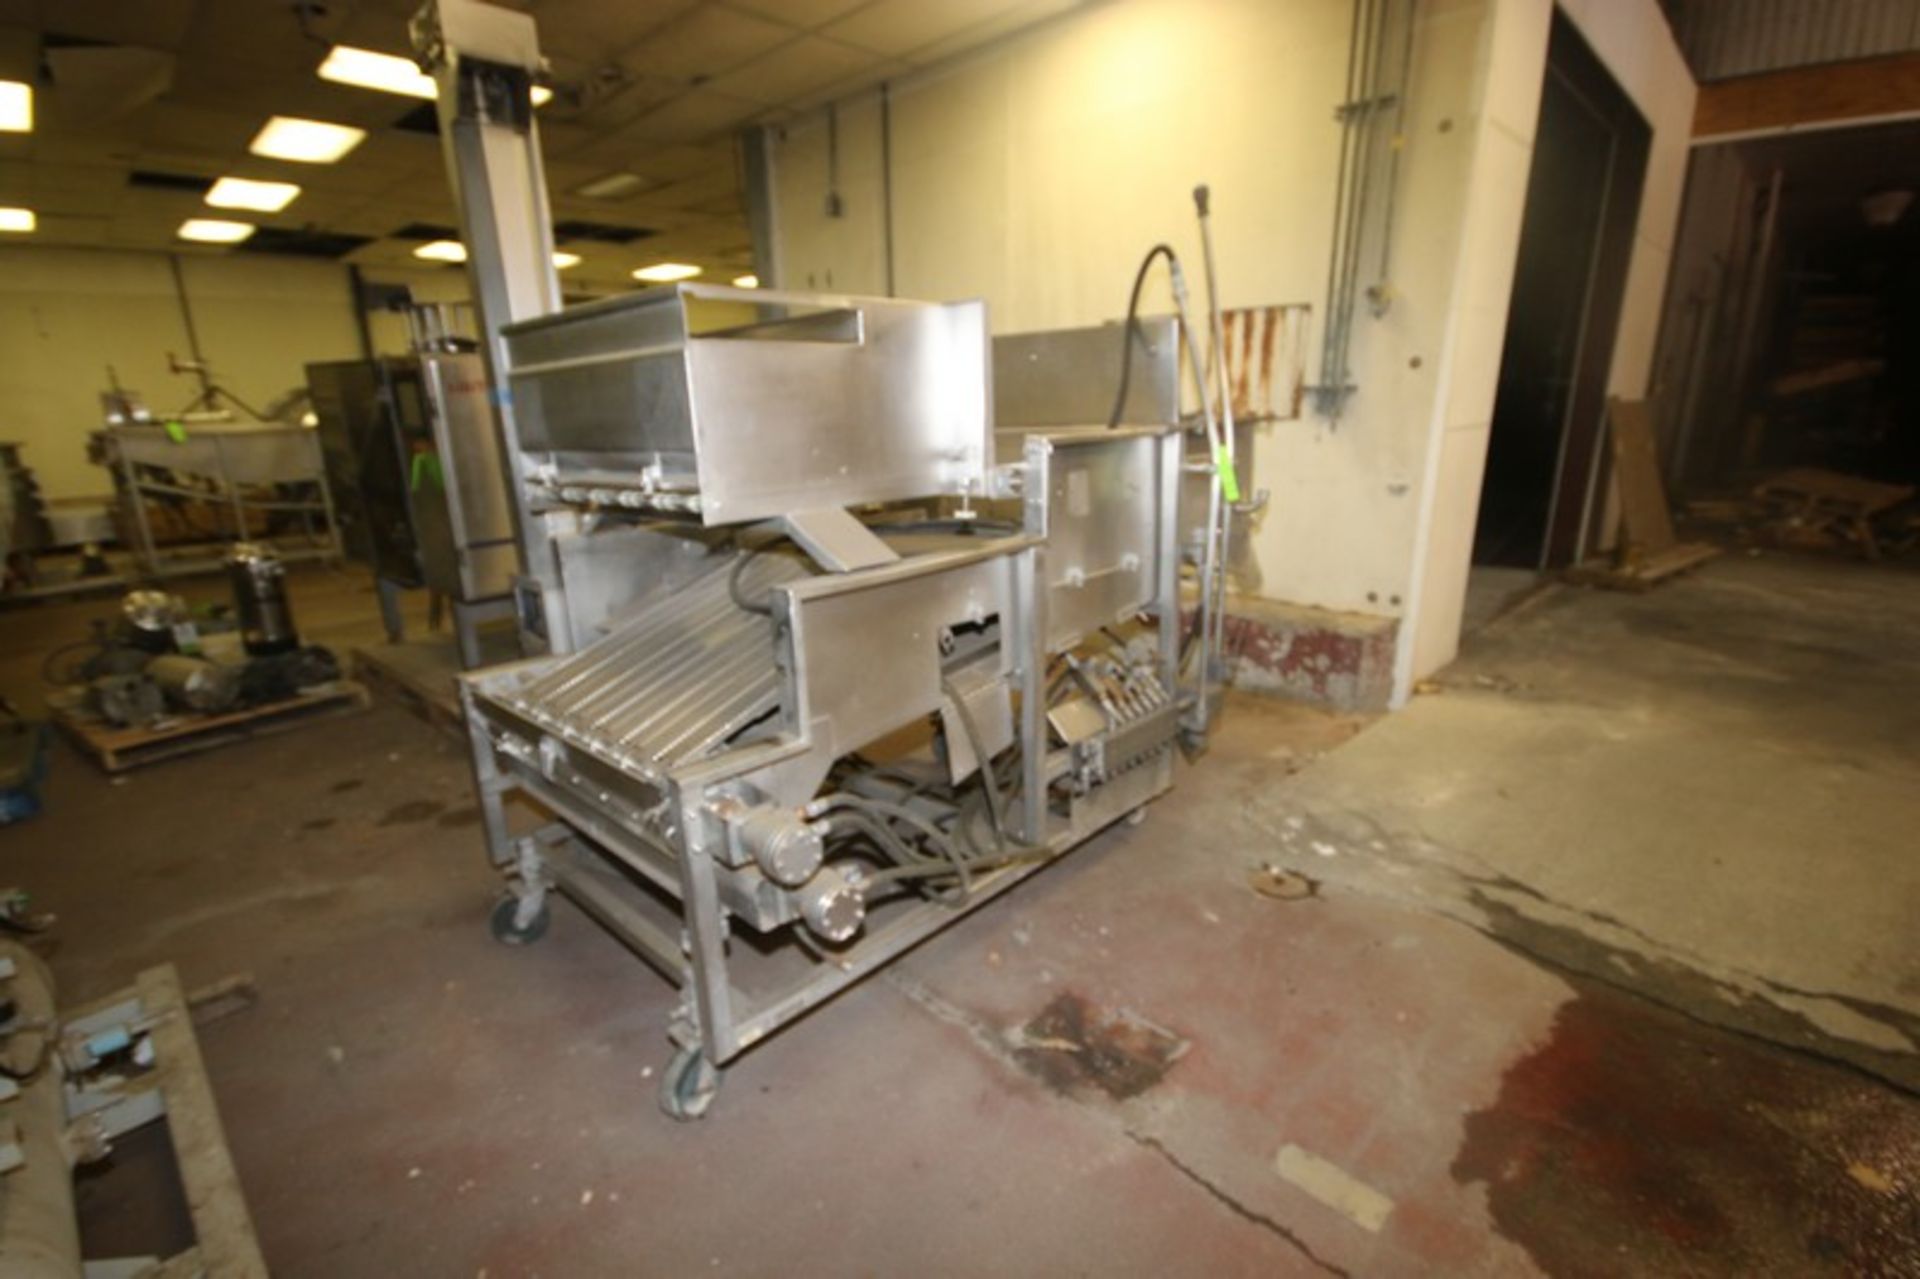 Stein S/S Breader, M/N XL-34, S/N 637, with Aprox. 34" W S/S Mesh Conveyor, with 15 hp - Image 2 of 11